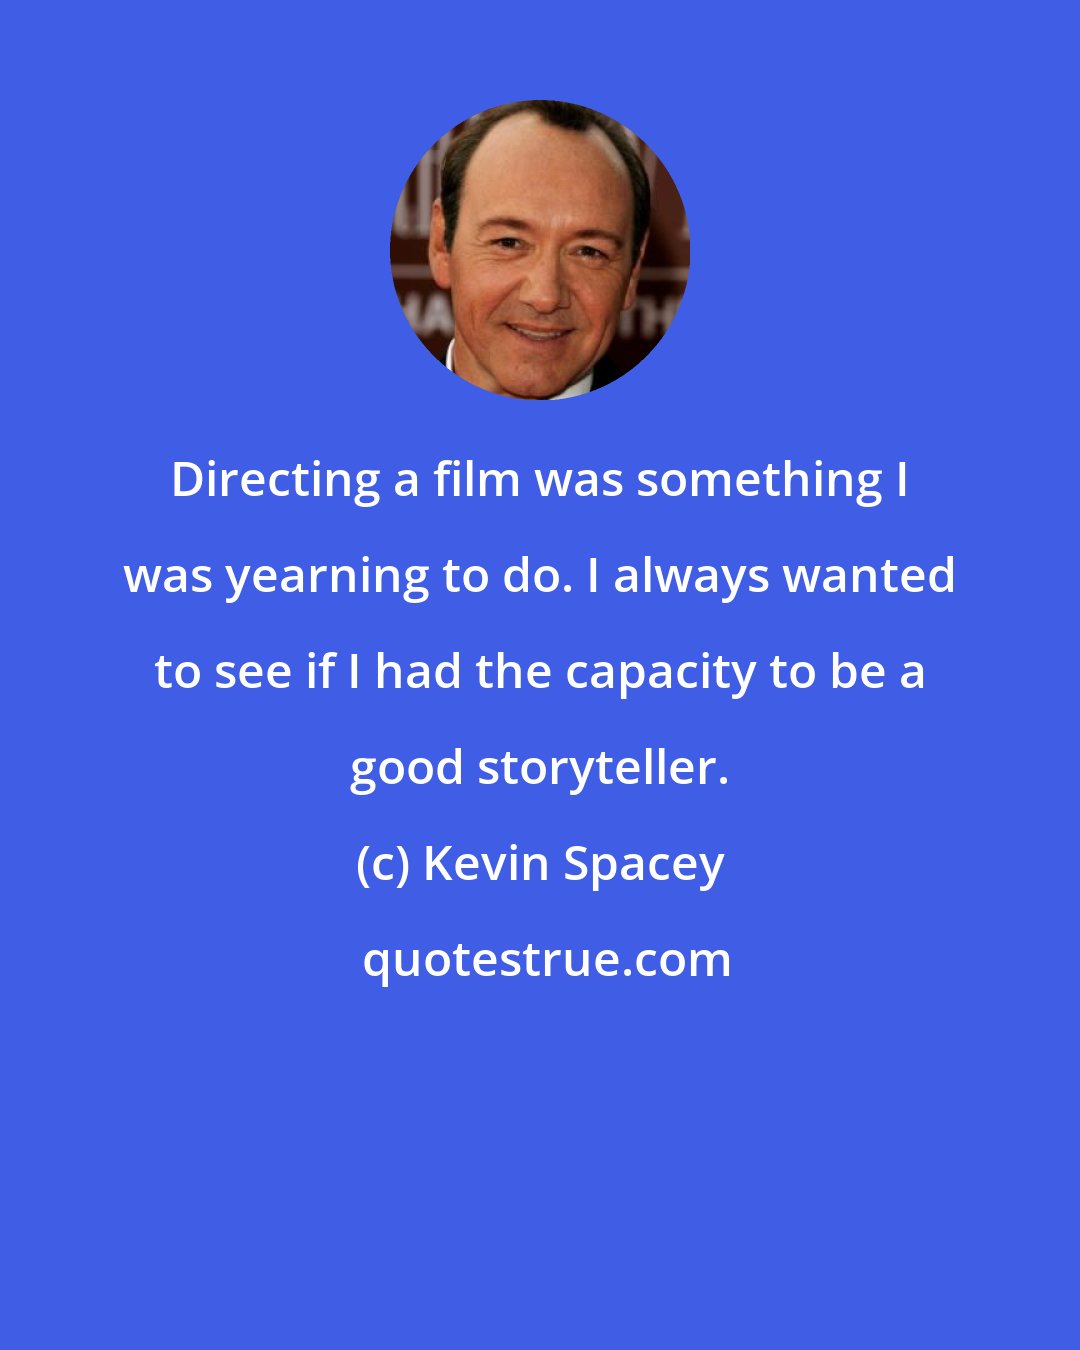 Kevin Spacey: Directing a film was something I was yearning to do. I always wanted to see if I had the capacity to be a good storyteller.